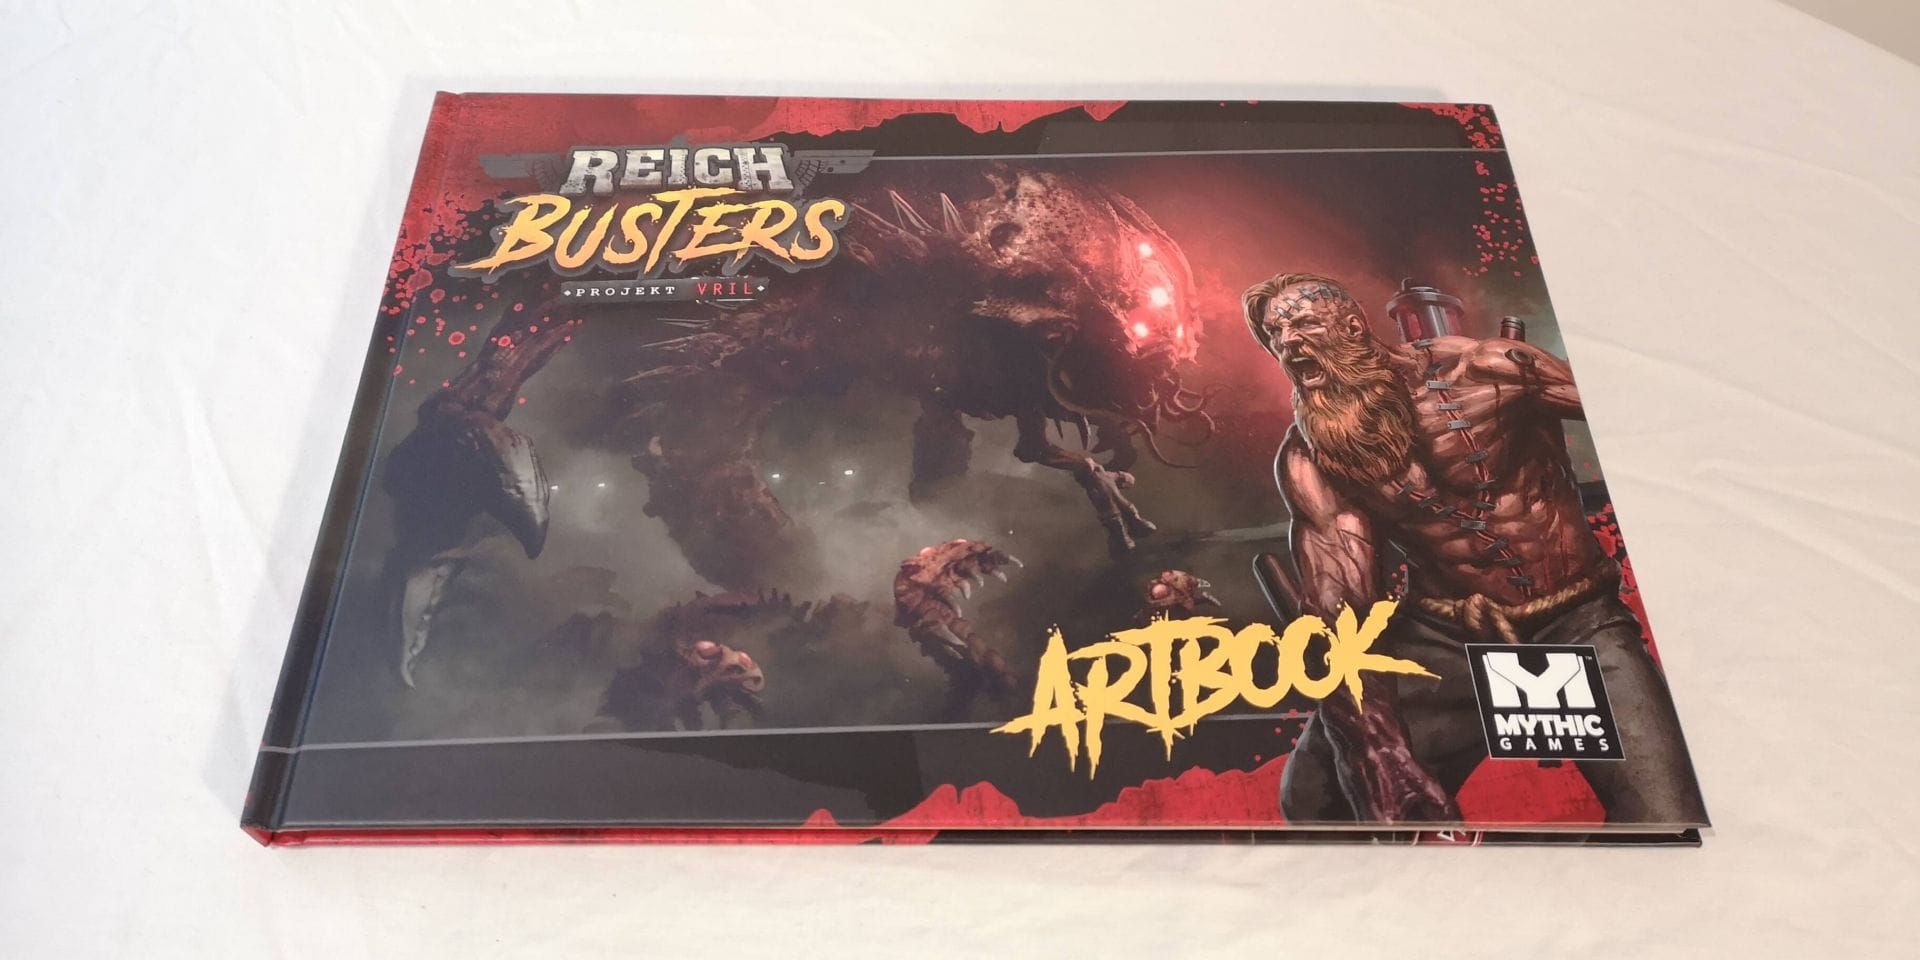 Reichbusters Art Book